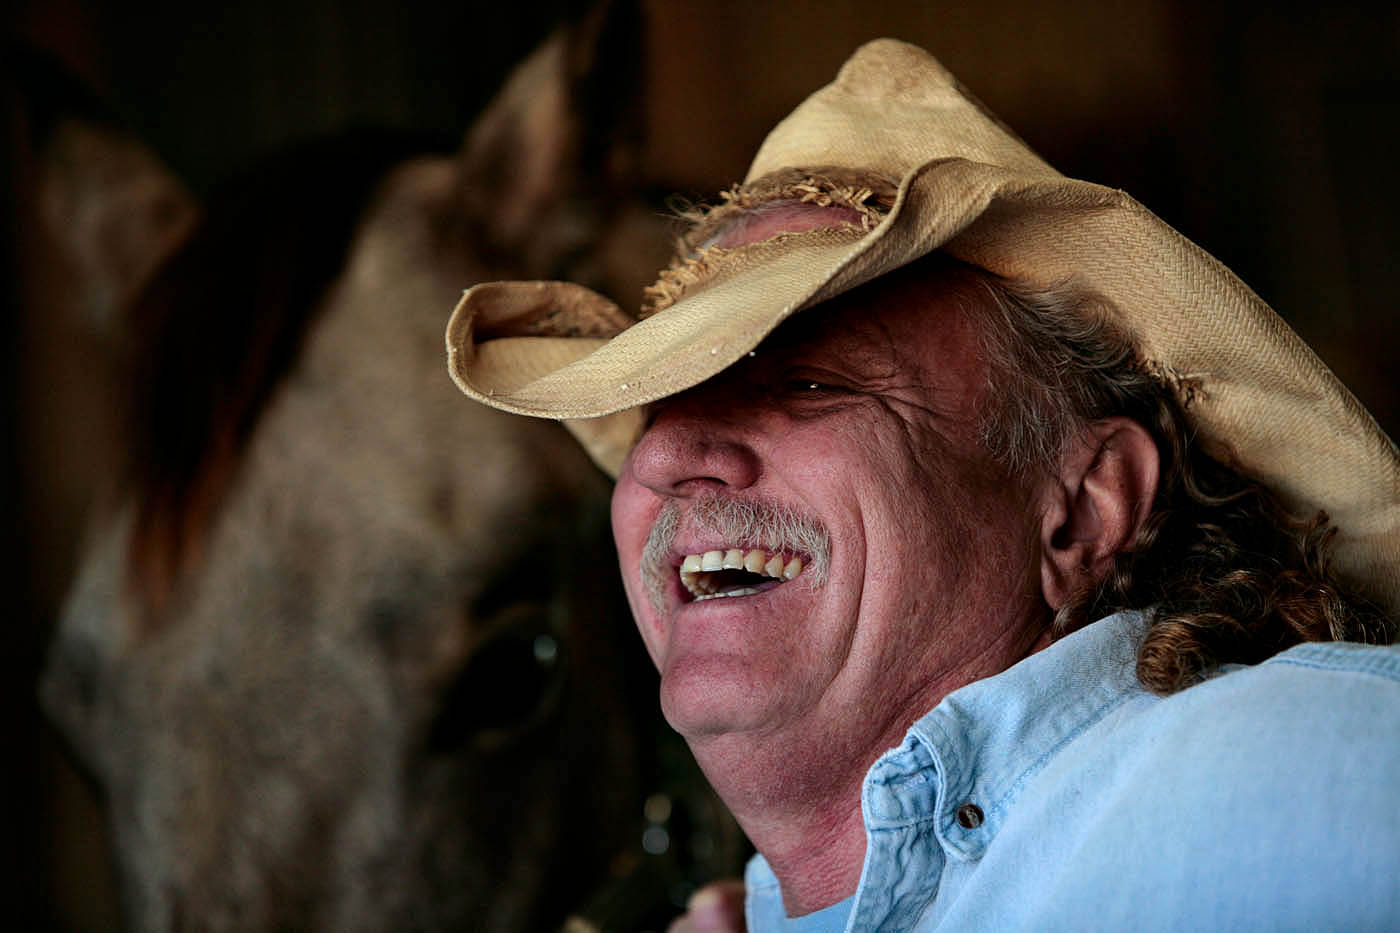 October 20, 2007 - Buddy Marrick holds one of his quarter horses while she is reshoed in Gary Gorley's barn in Danville, Kentucky. The two men trade and breed horses and keep an eye on each other's land. Marrick doen't have a barn, so Gorley lets him use his. 